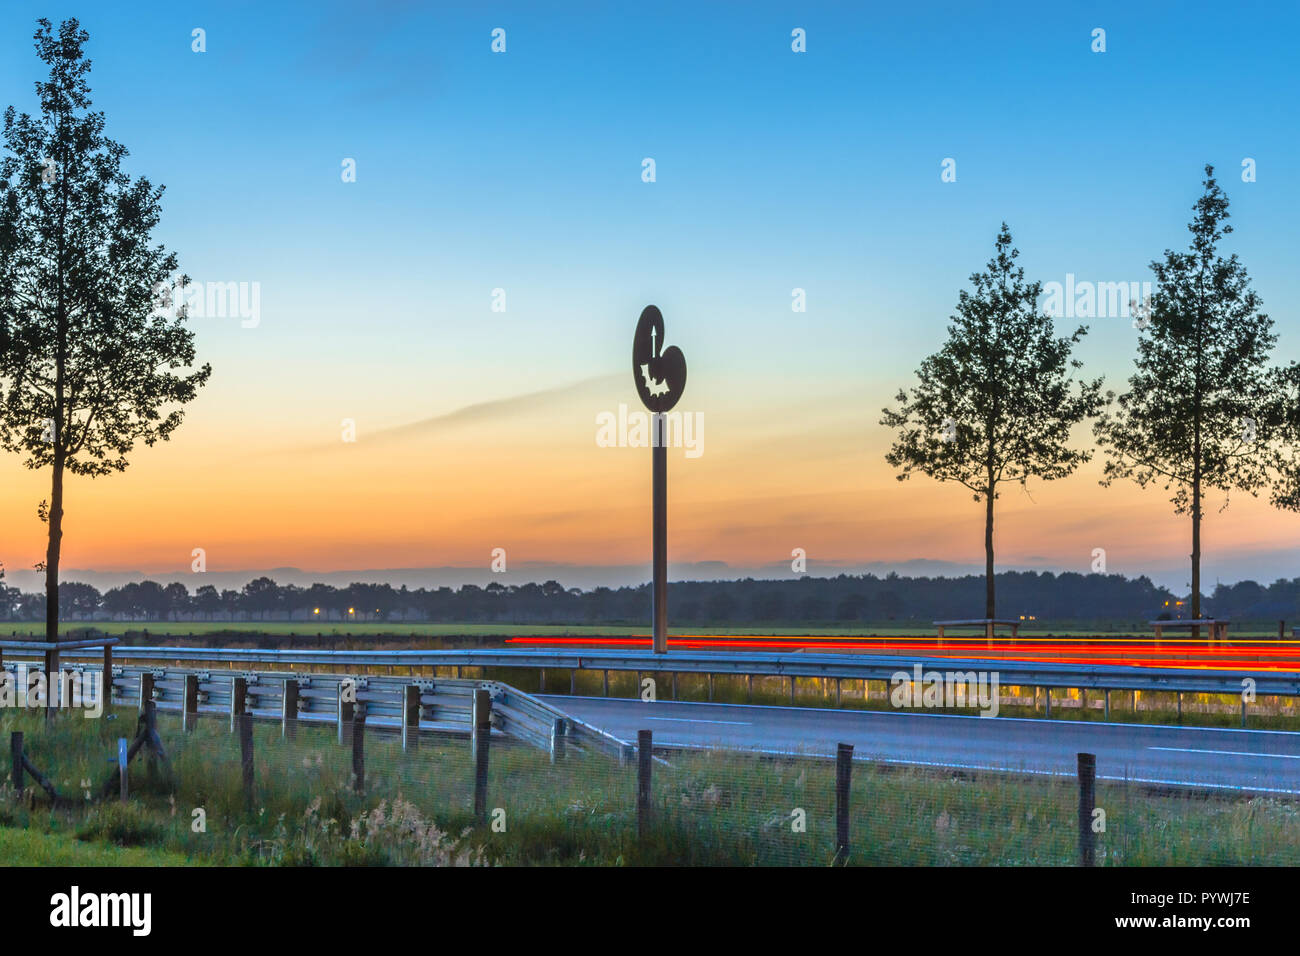 Drachten, Netherlands - June 9, 2016: Regional highway N381 at dusk with proven functional wildlife crossing hop over aids for bats and birds Stock Photo